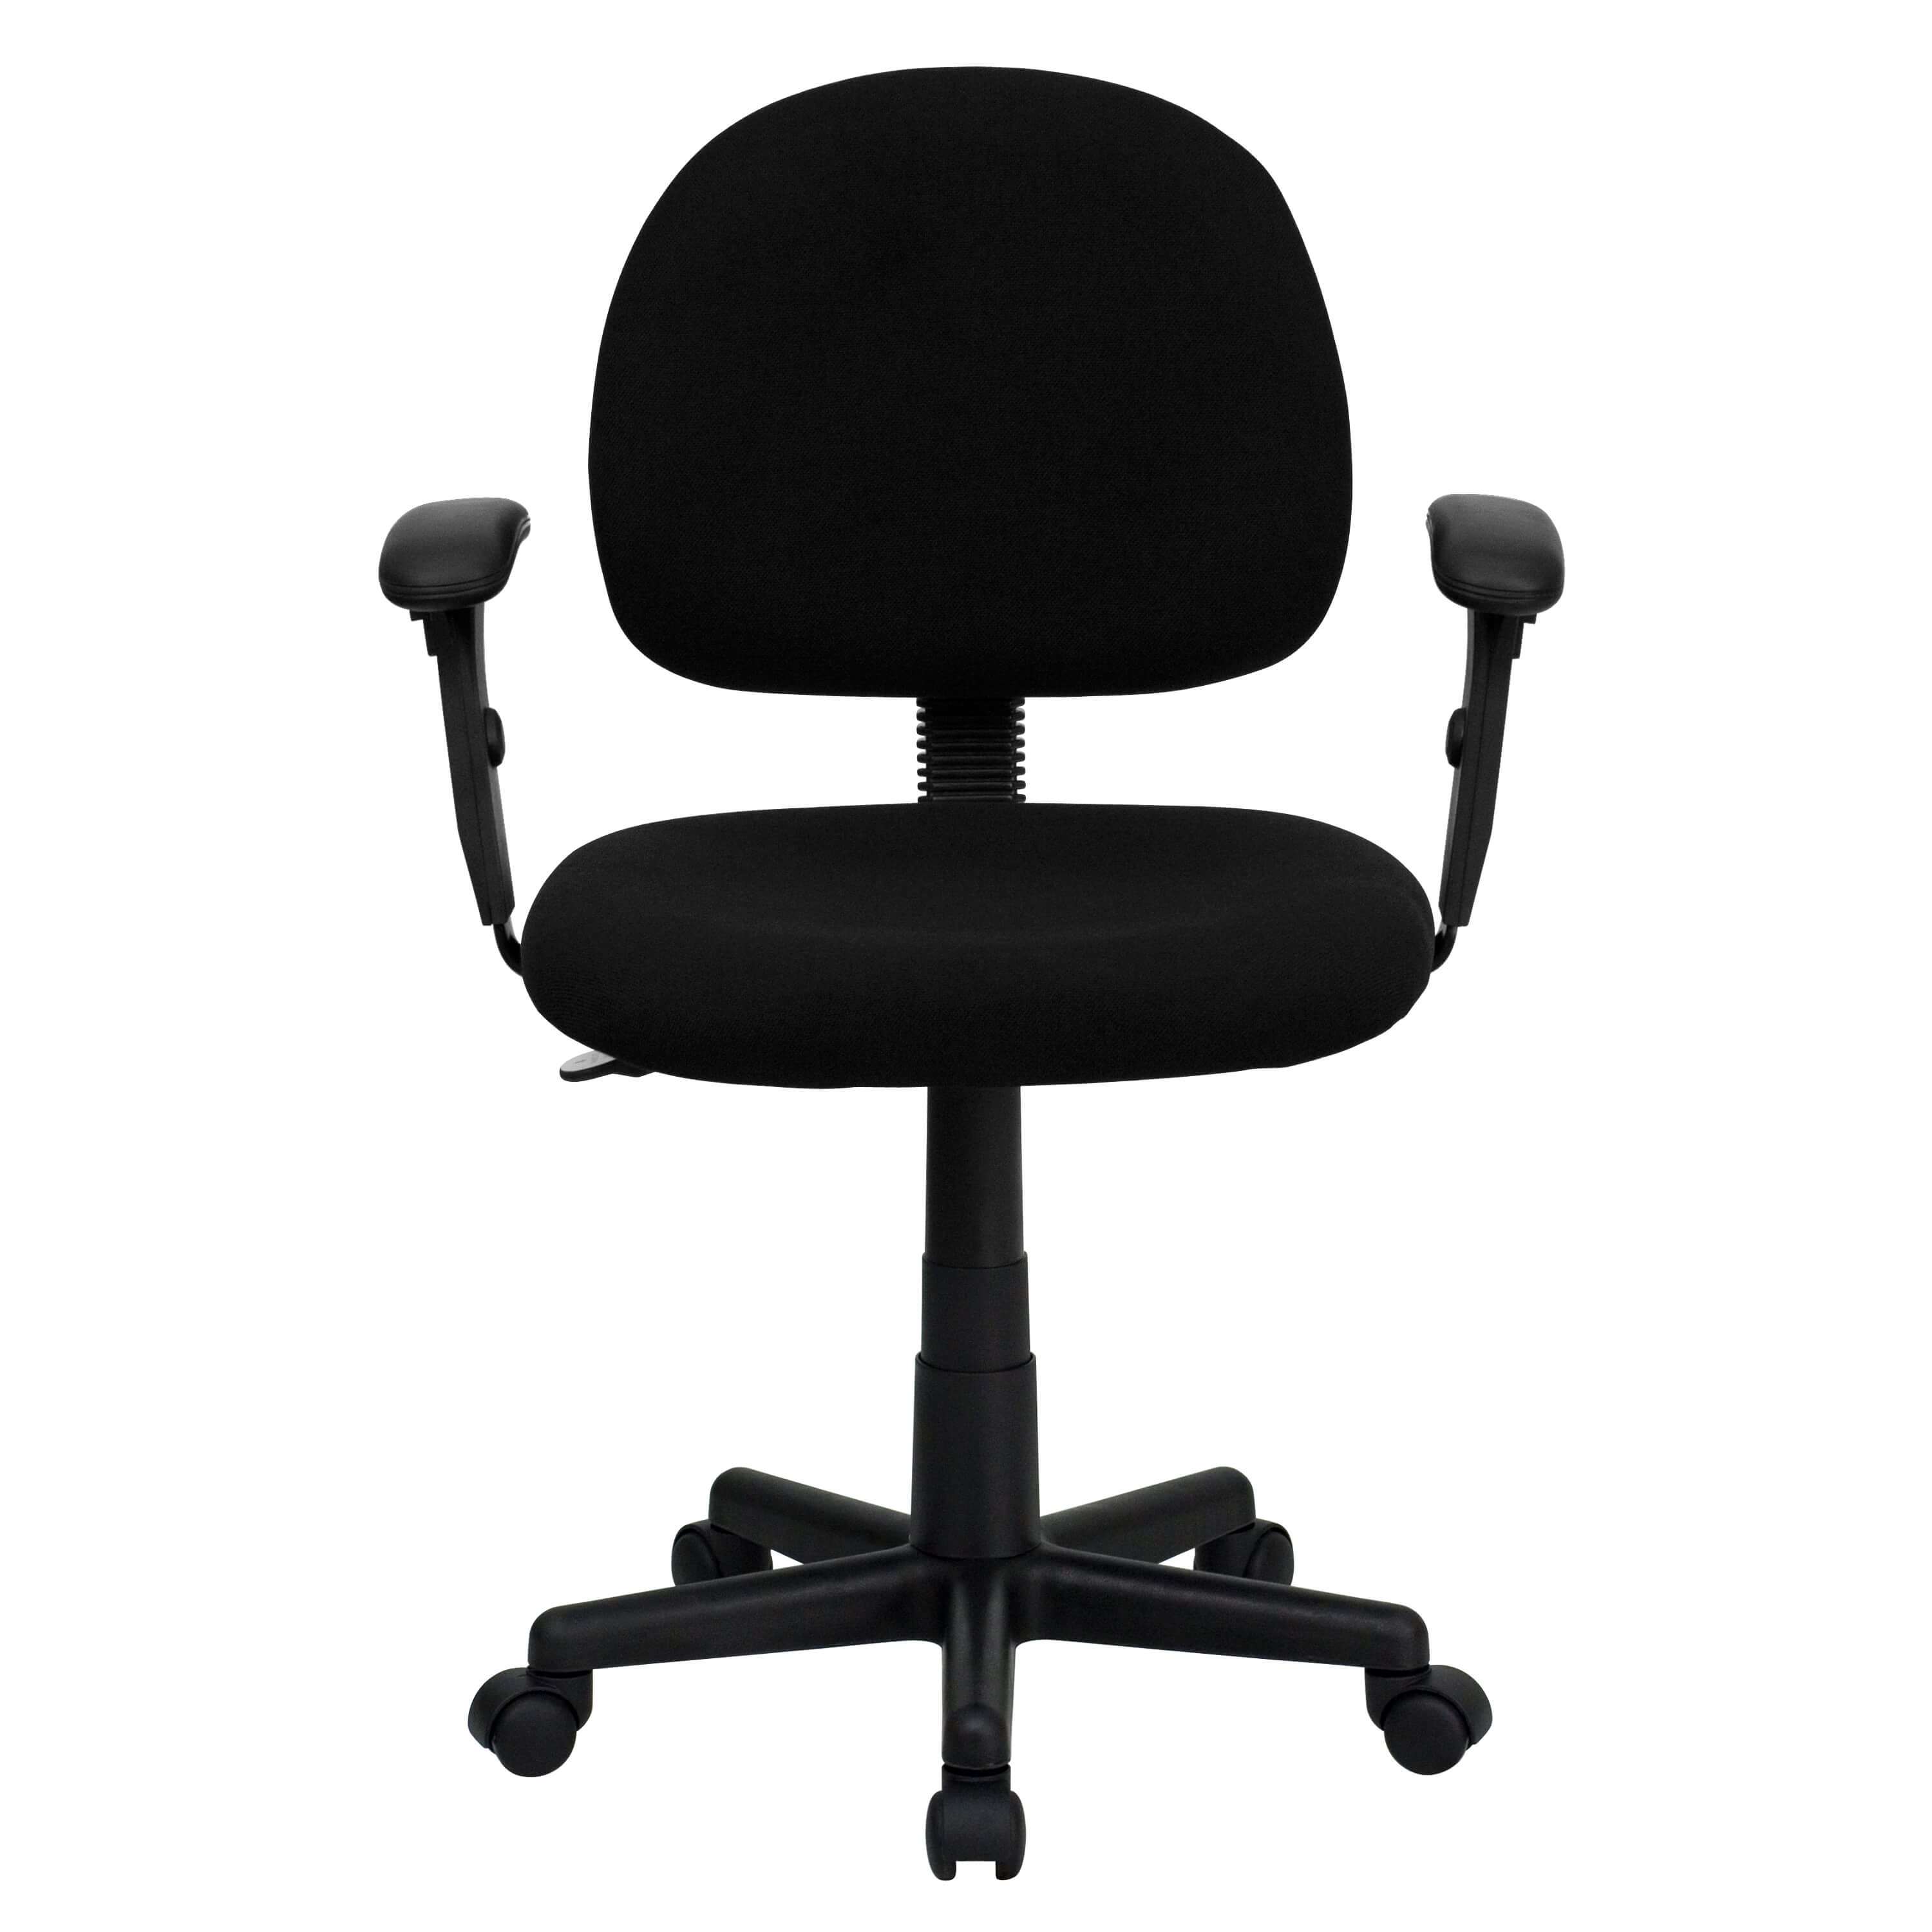 Discount Chairs Under $150 - Kuma Fabric Office Chairs